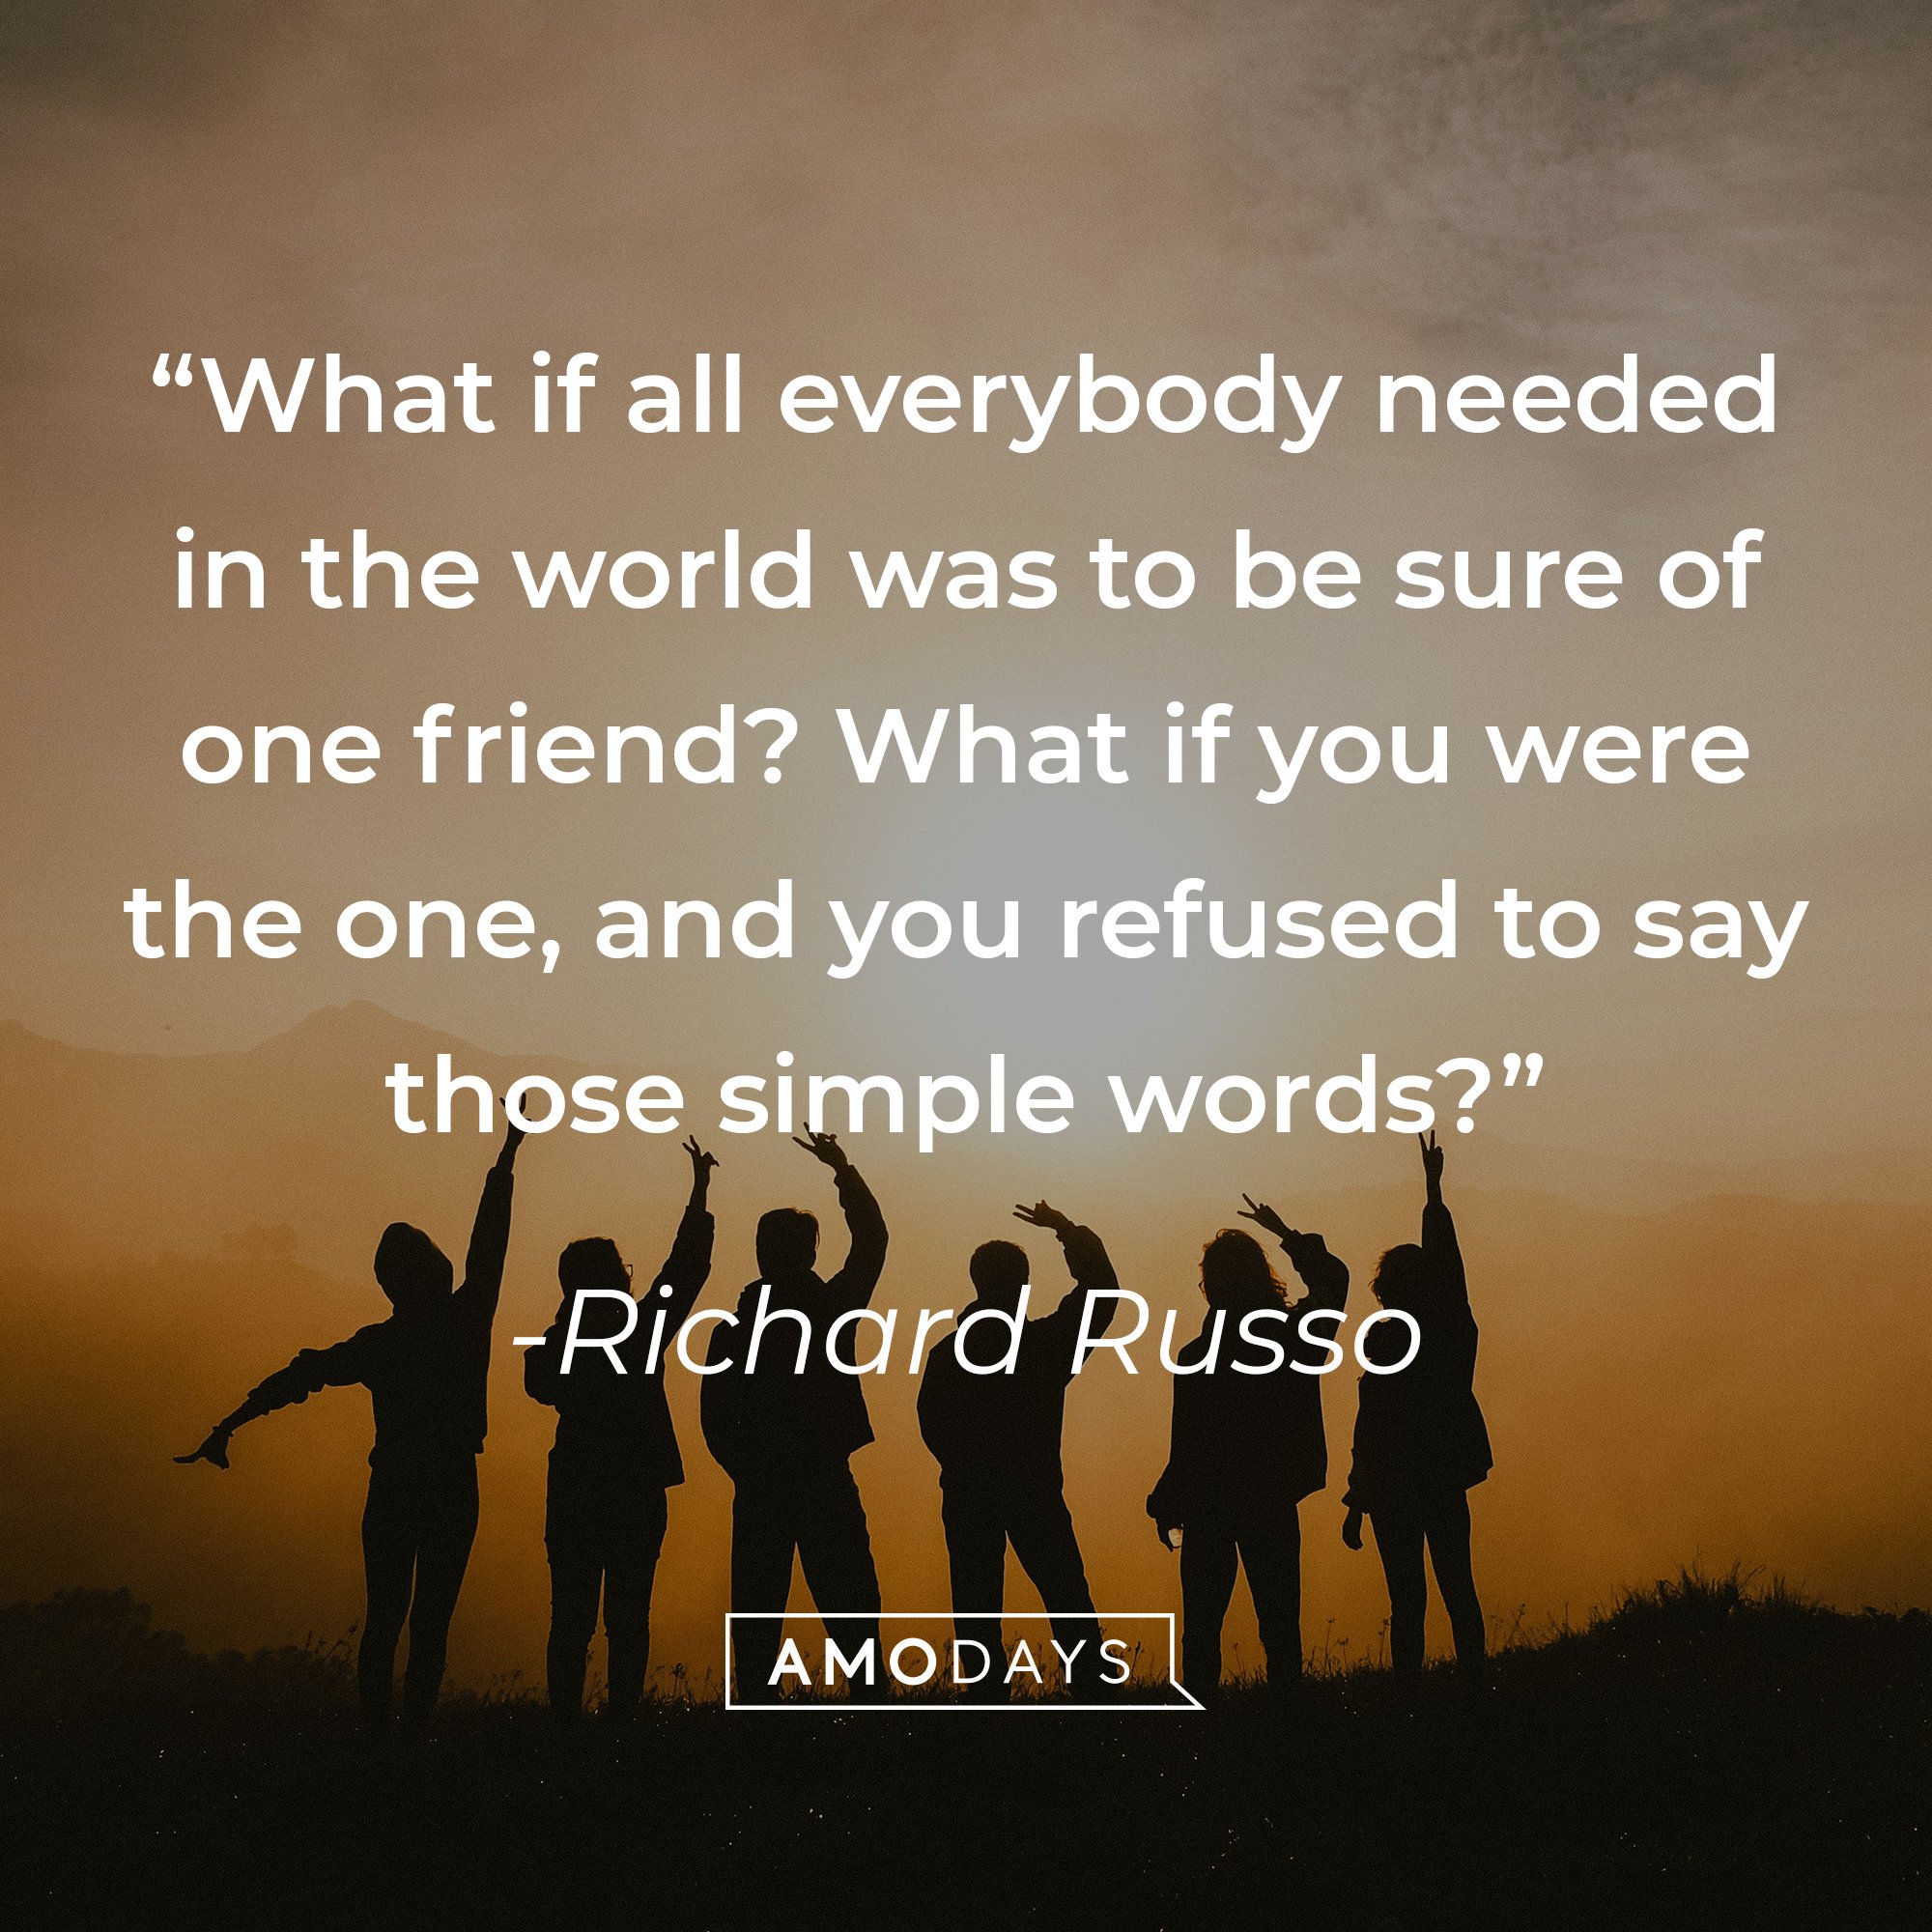 Richard Russo's quote: "What if all everybody needed in the world was to be sure of one friend? What if you were the one, and you refused to say those simple words?" | Image: AmoDays